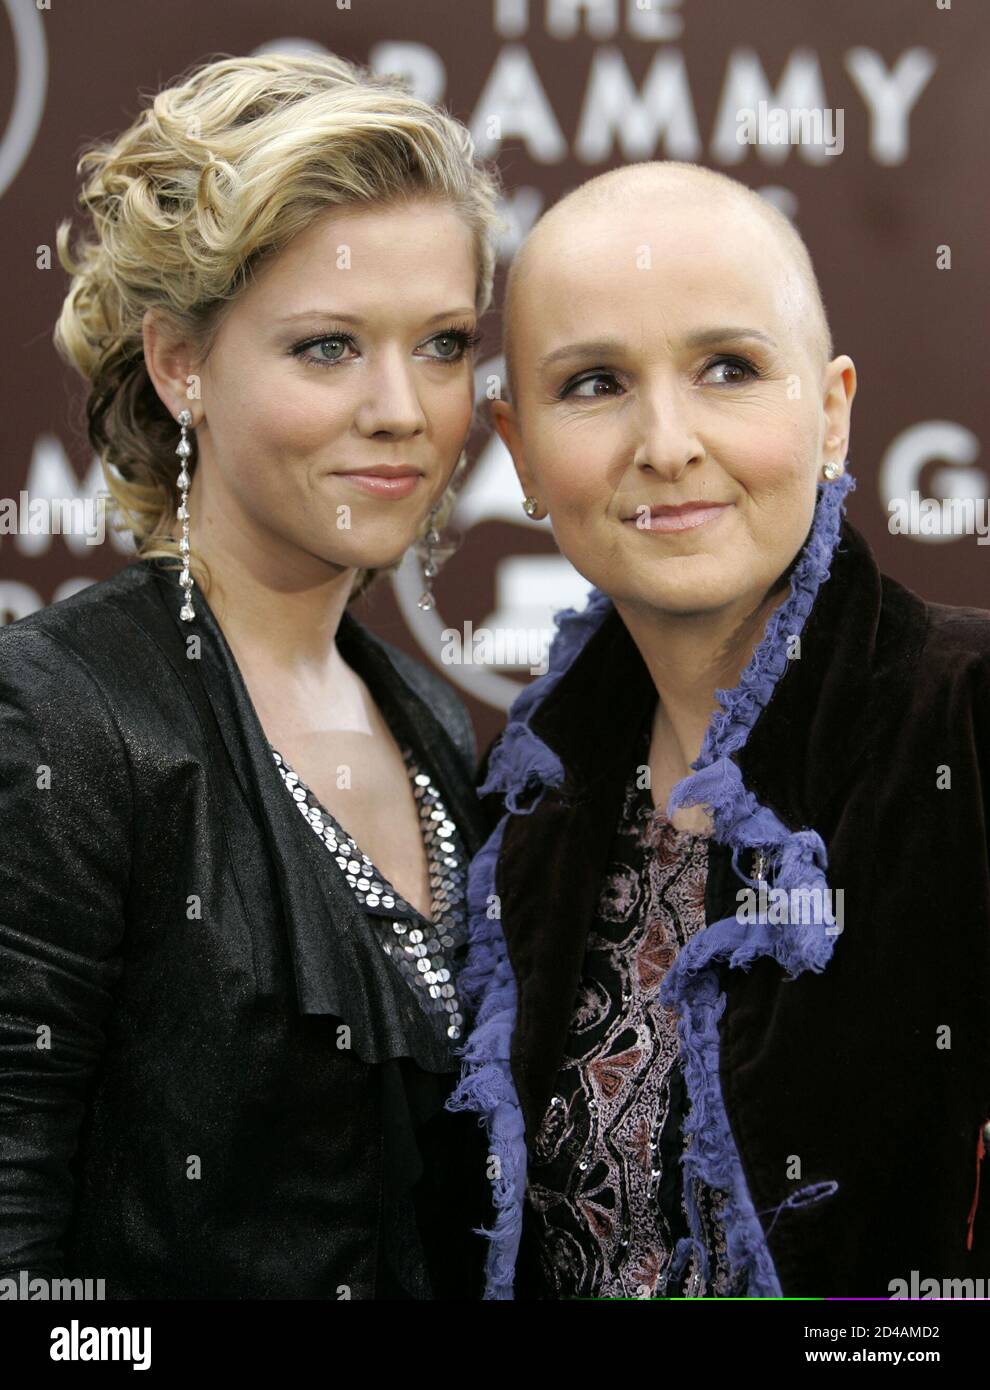 Singer Melissa Etheridge, without hair due to chemotheraphy treatments,  poses with her life partner actress Tammy Lynn Michaels as they arrive at  the 47th annual Grammy Awards at the Staples Center in